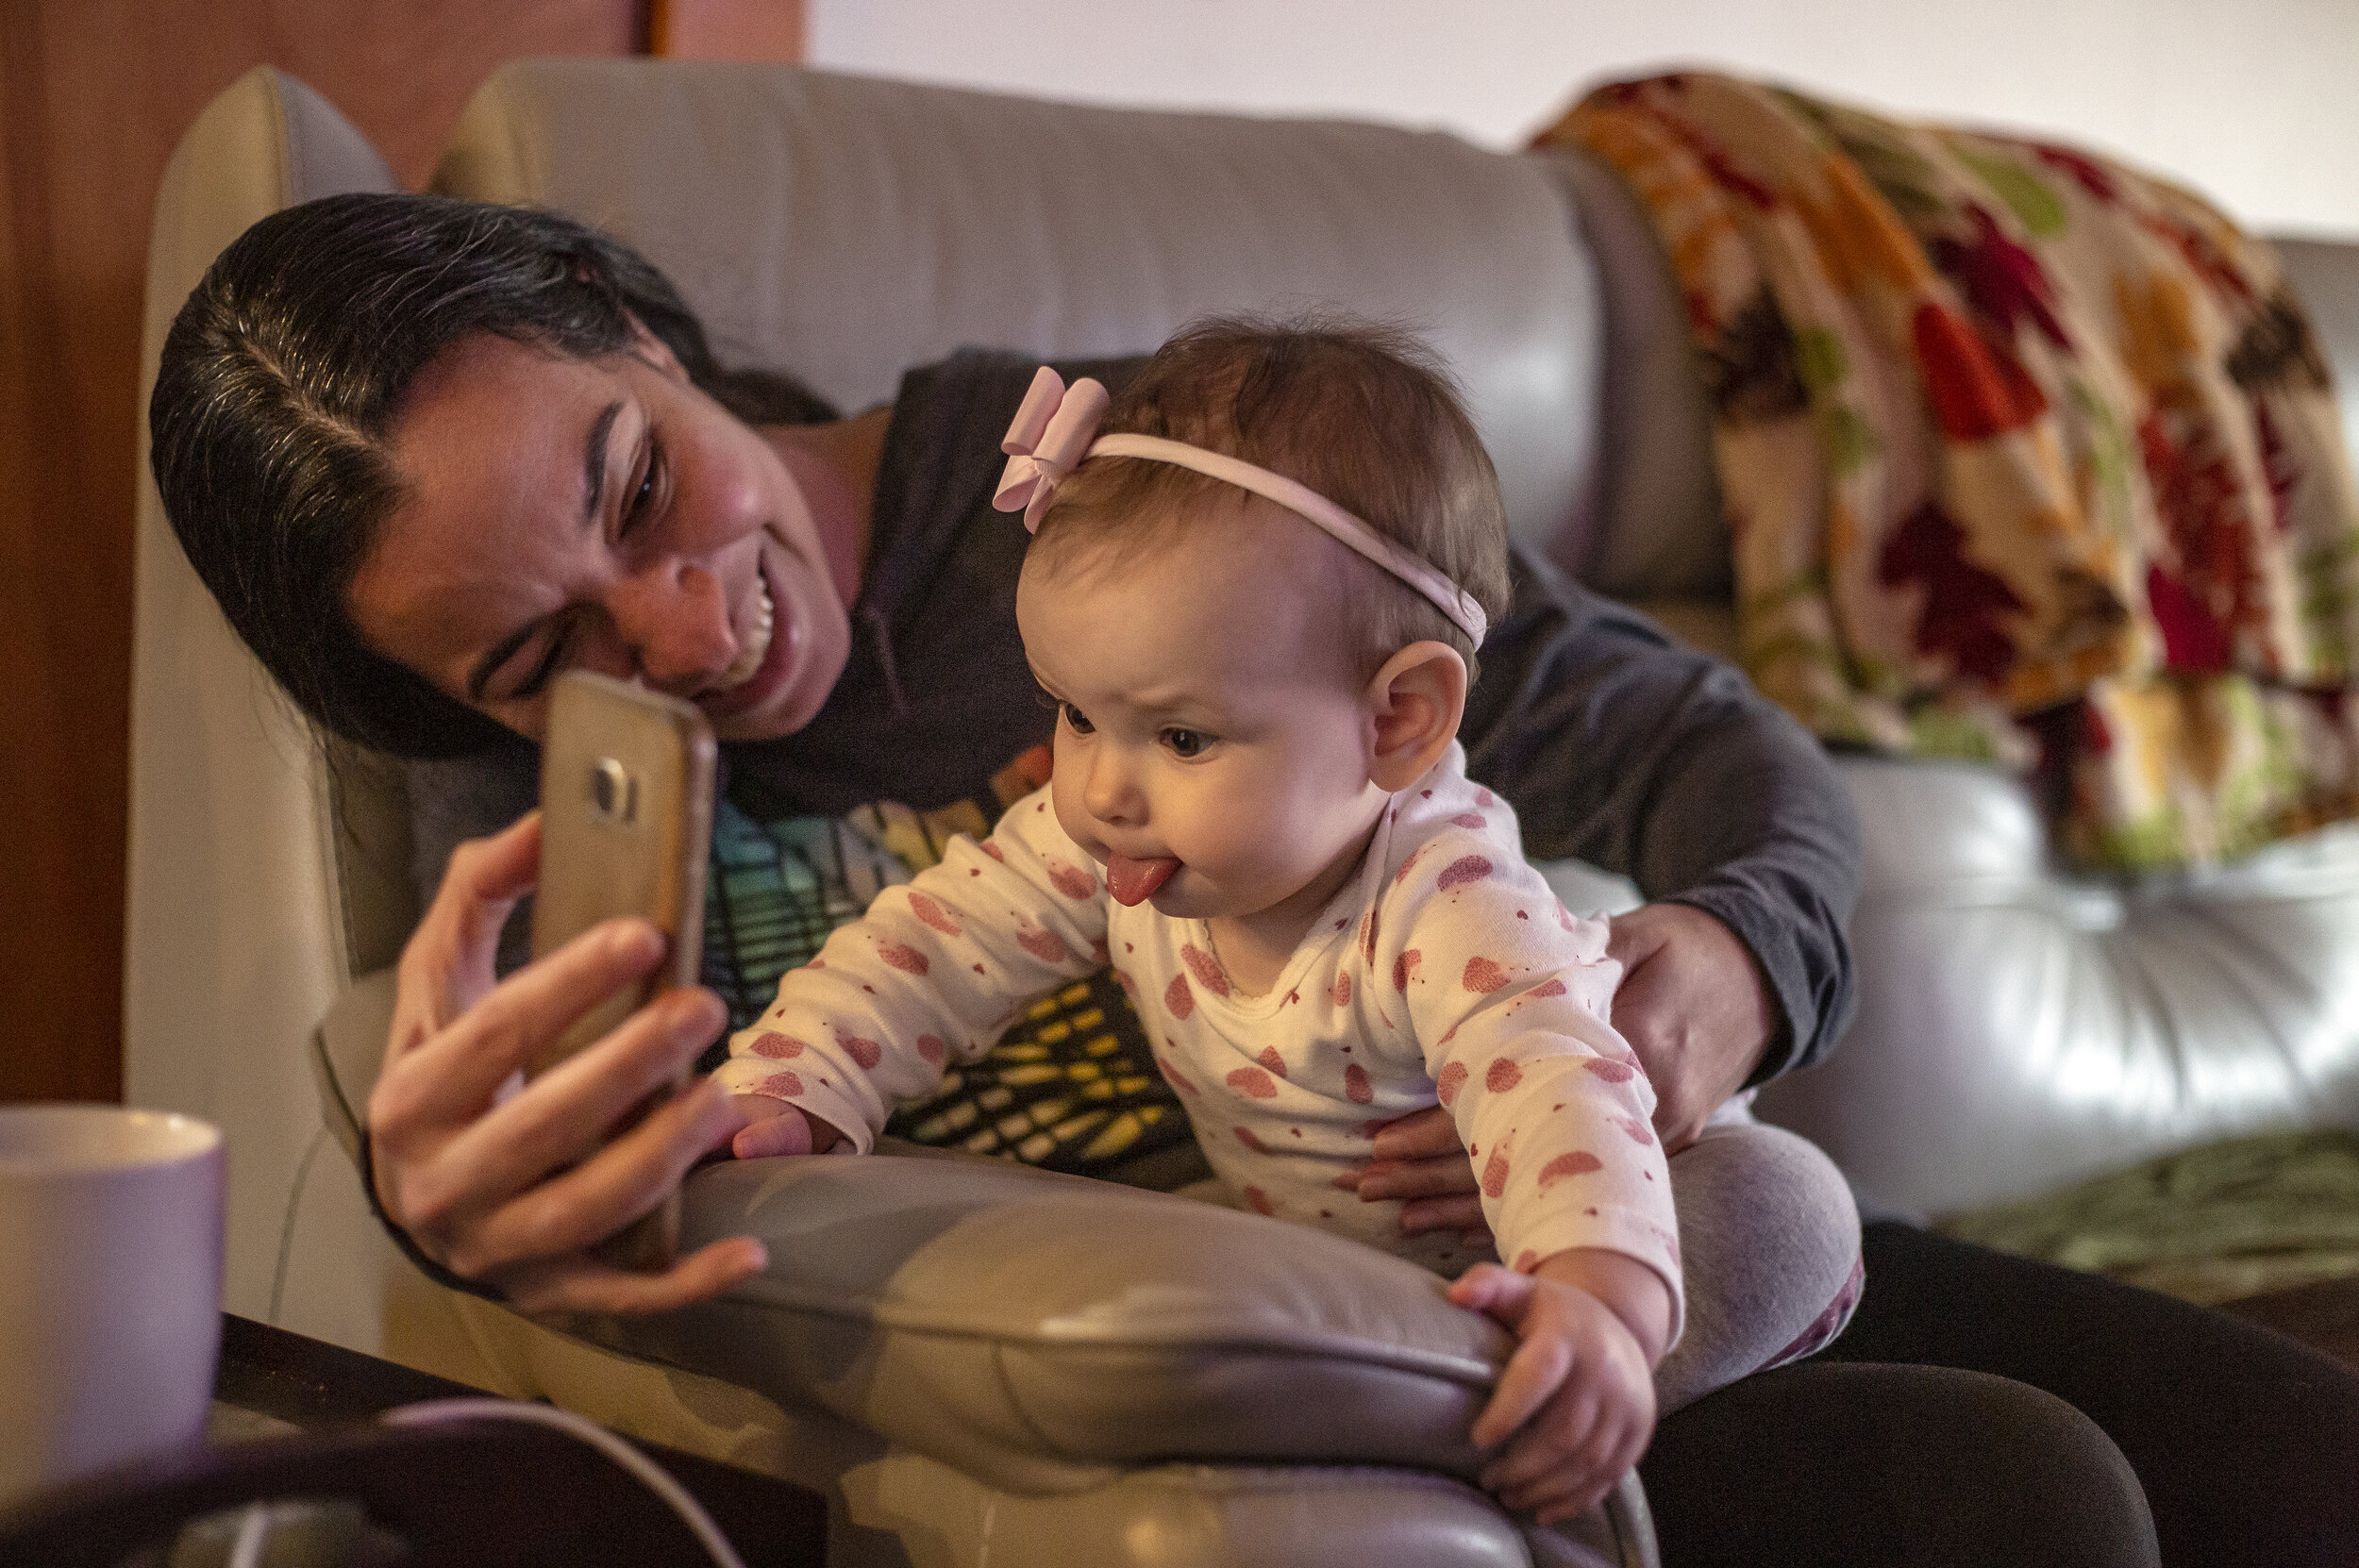  Souza uses FaceTime to show Isadora to her immediate family in Brazil in November. It is difficult for Souza’s parents to watch their first grandchild grow up over phone screen, but Souza looks forward to giving them daily updates on Isadora. 